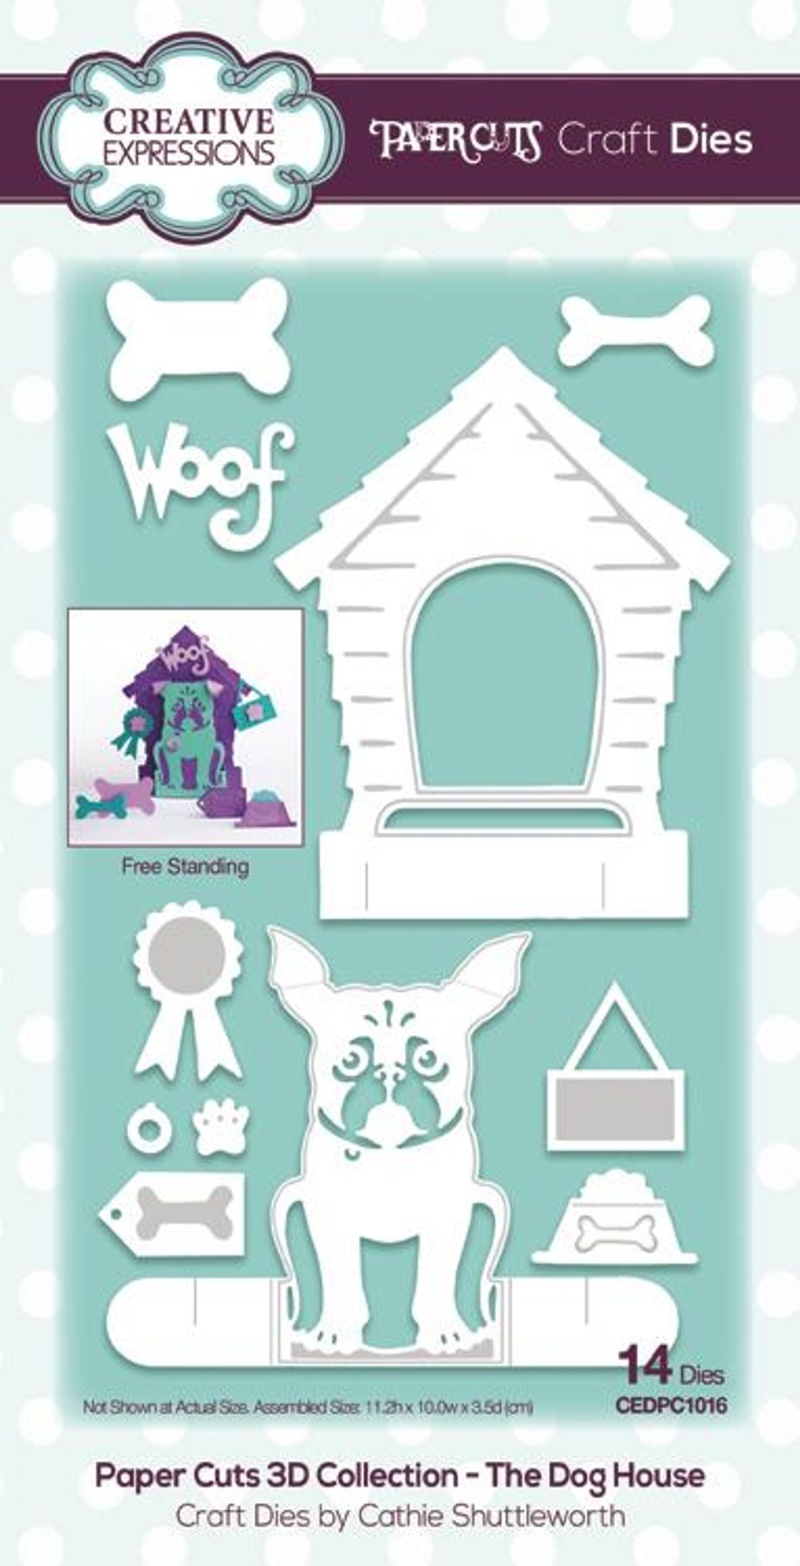 Creative Expressions Die Paper Cuts 3D - The Dog House